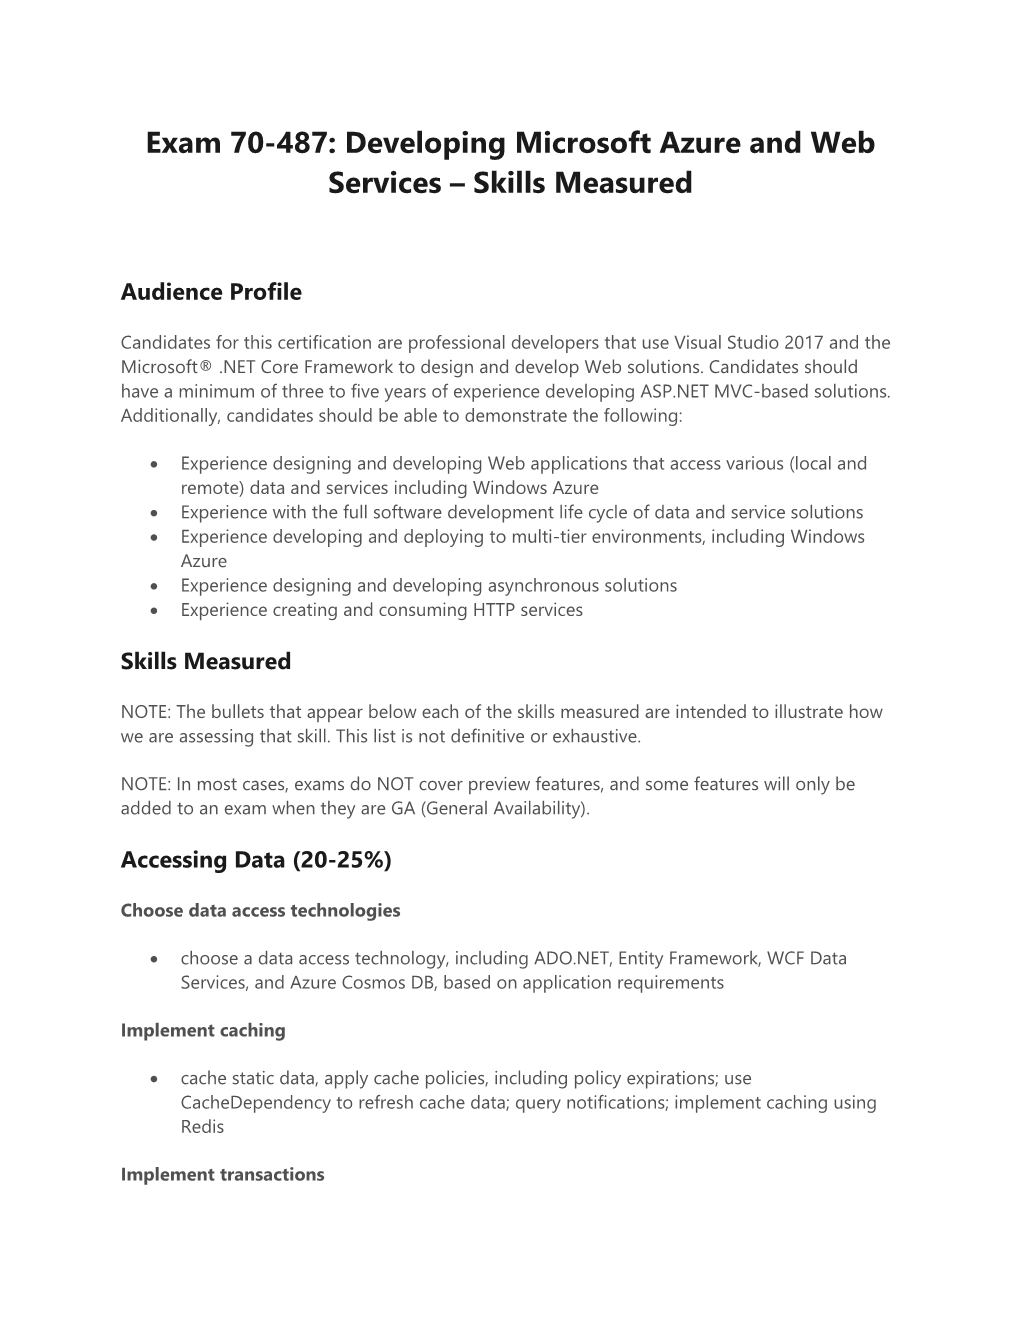 Exam 70-487: Developing Microsoft Azure and Web Services – Skills Measured